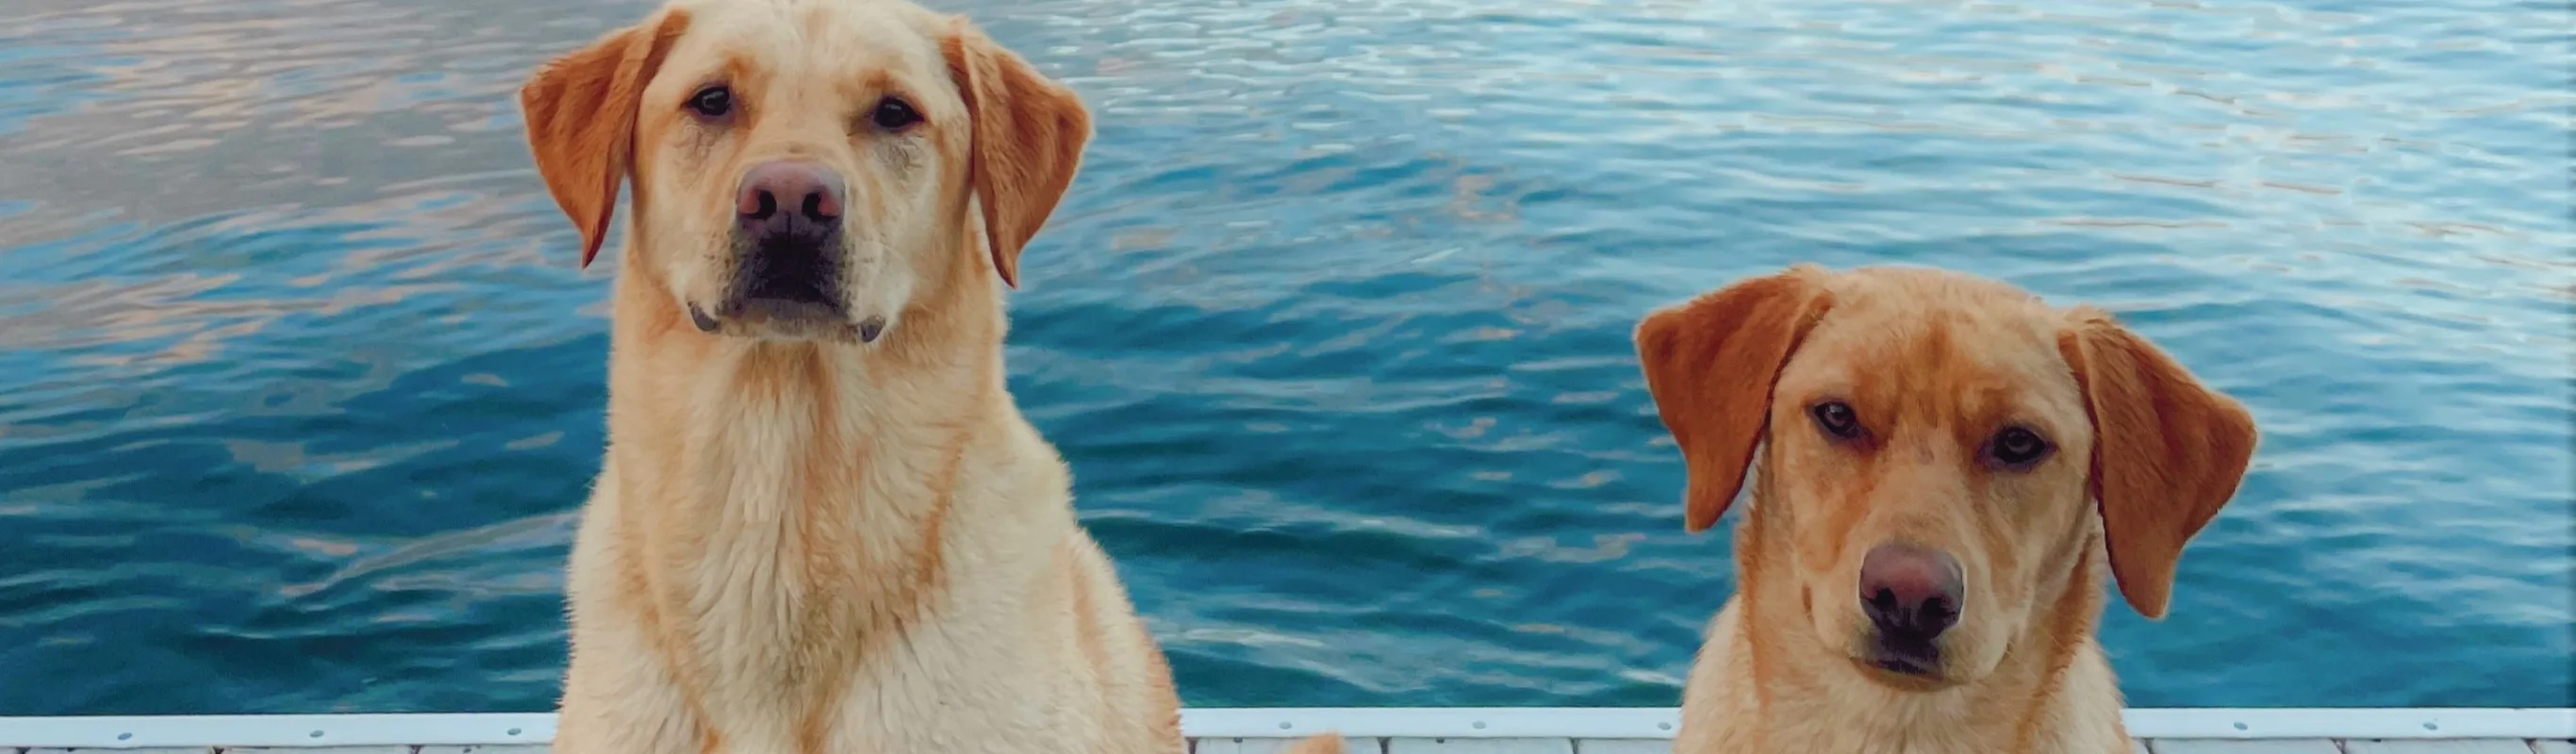 Two dogs on a pier in front of a lake